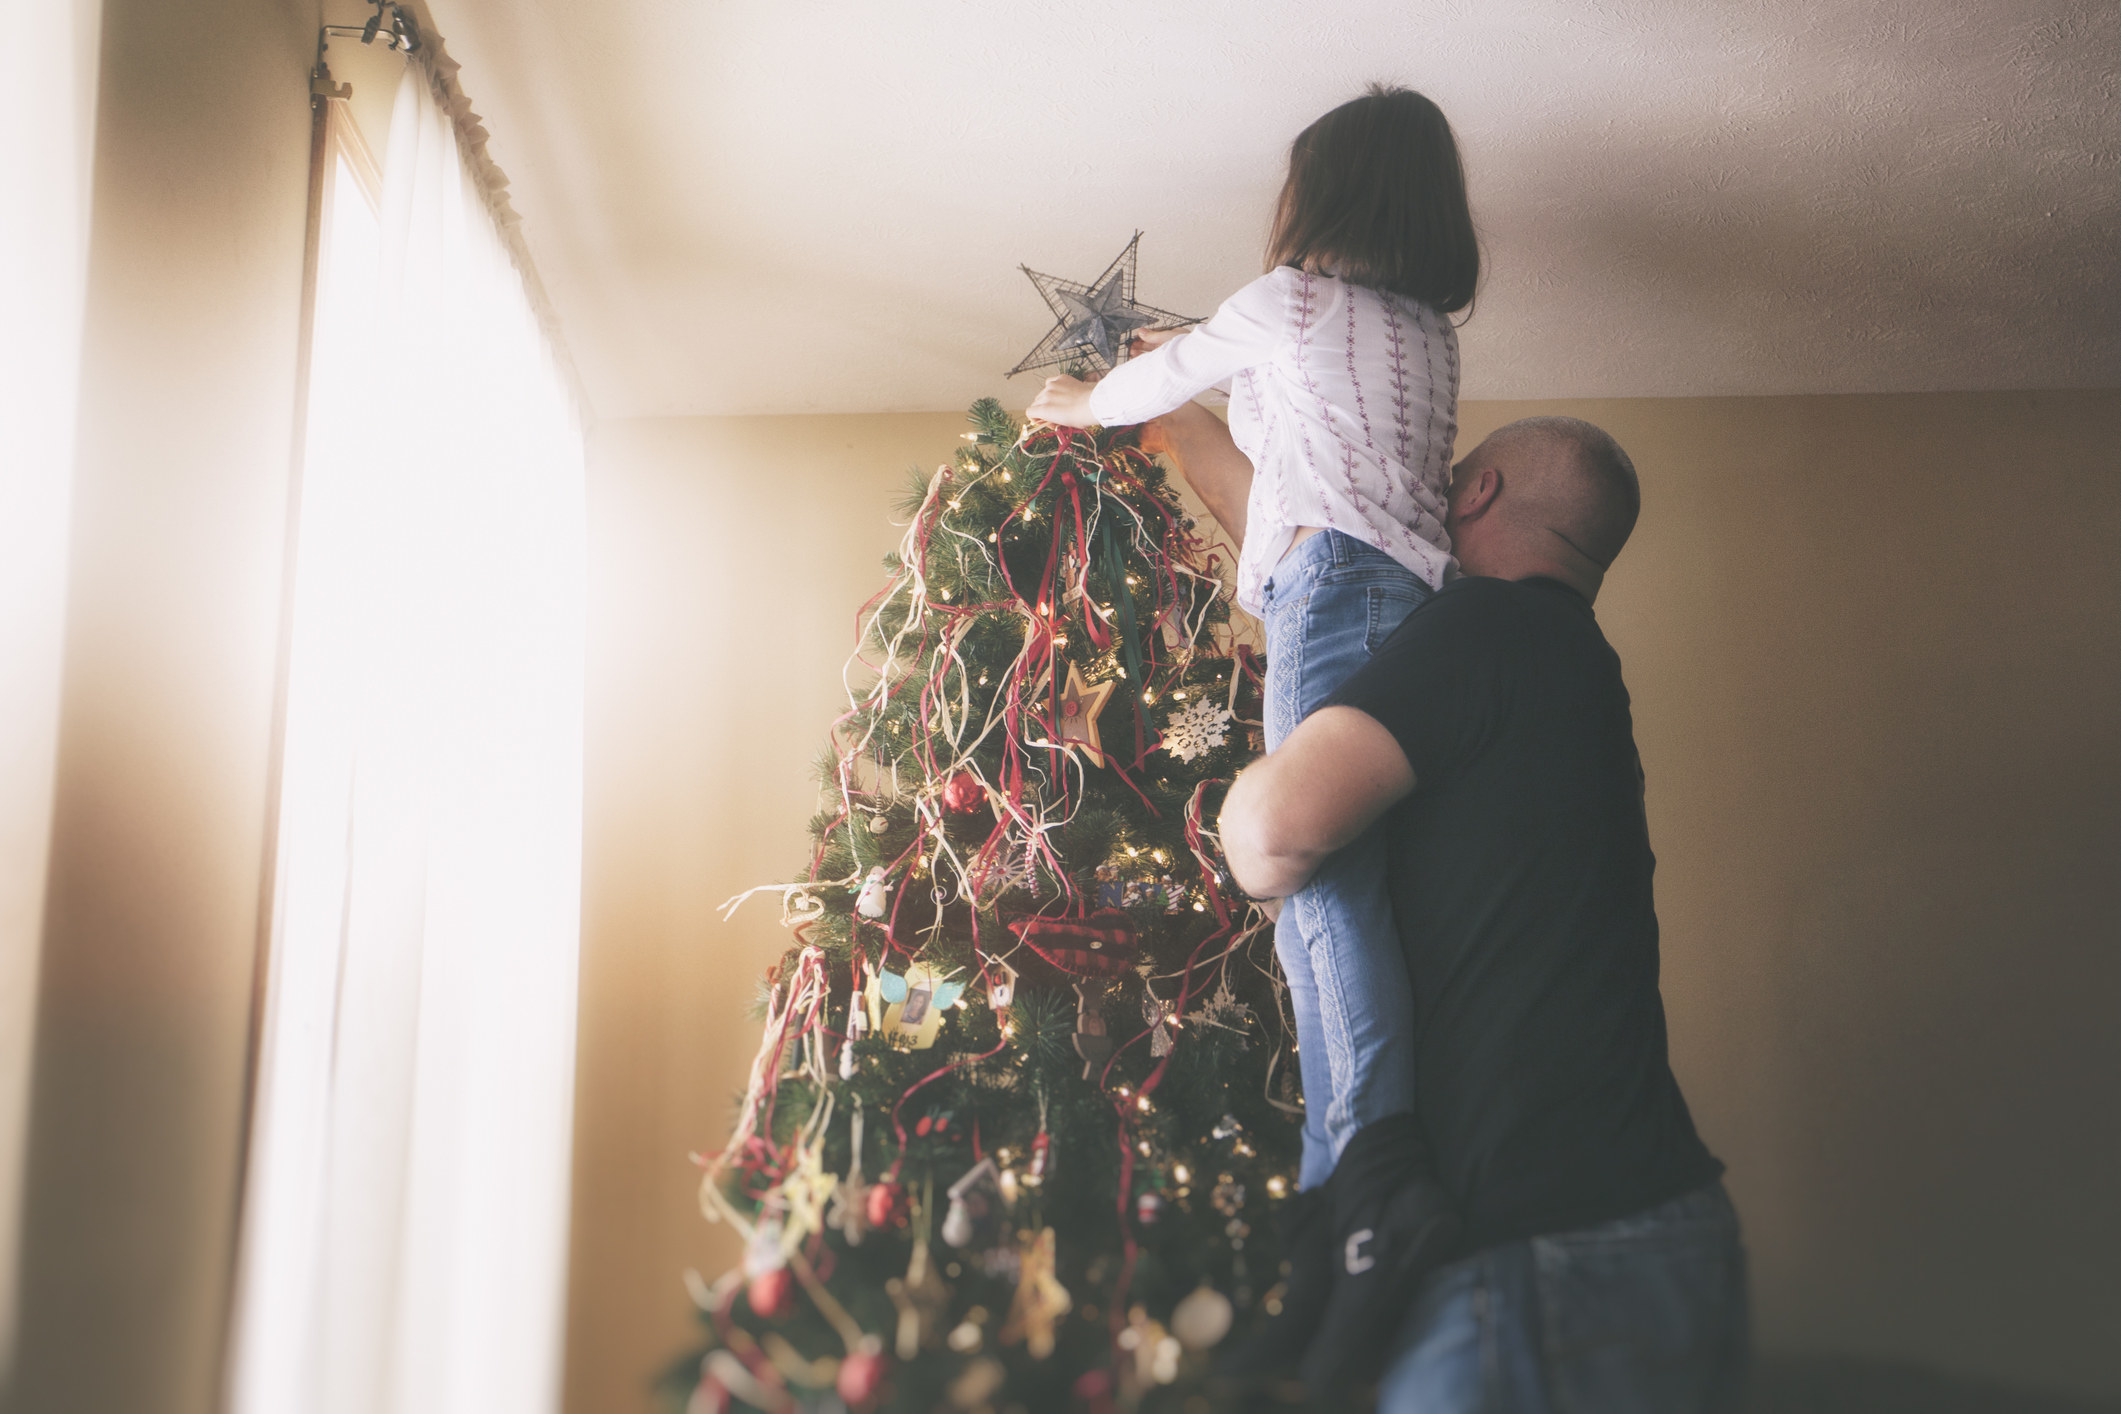 Man lifting his daughter up to put the star on top of the Christmas tree